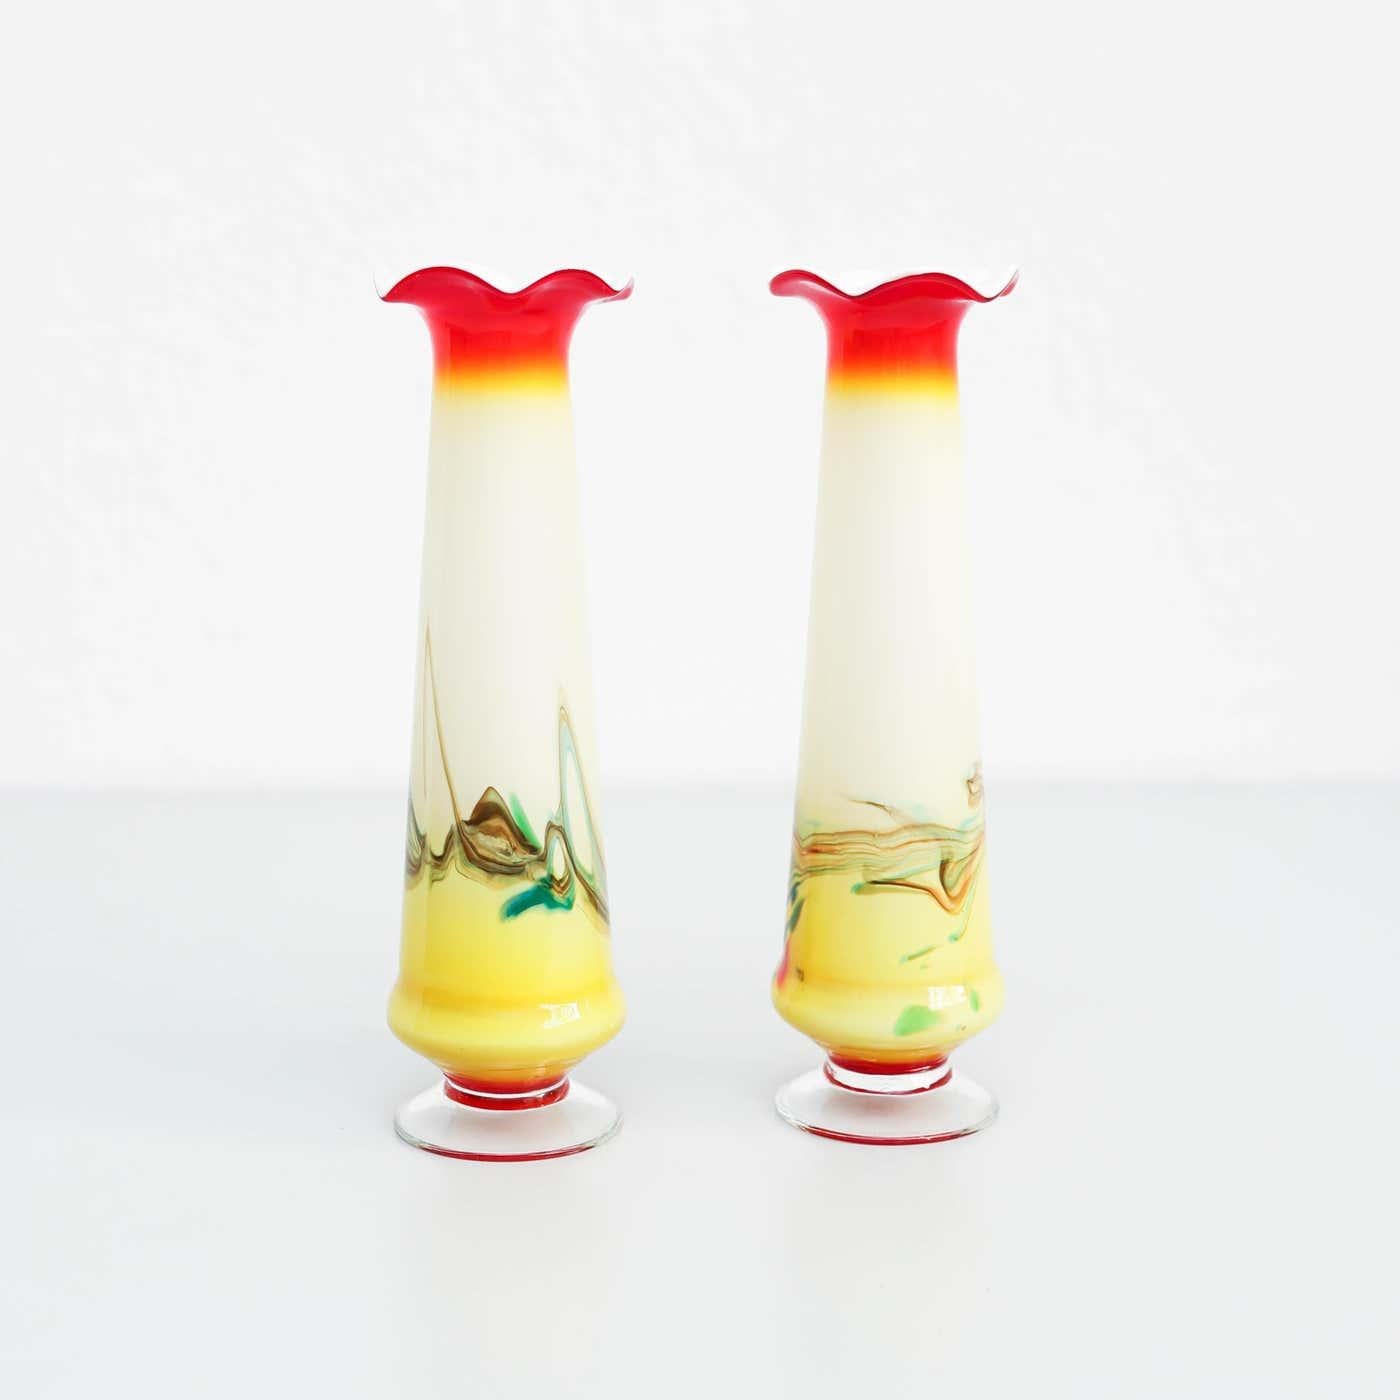 Pair of Early 20th Century Painted Glass Vases

Origin: France
Style: Art Nouveau
Material: Glass

Add a touch of elegance to your space with this set of two early XXth century Art Nouveau style painted glass vases, crafted in France by an unknown